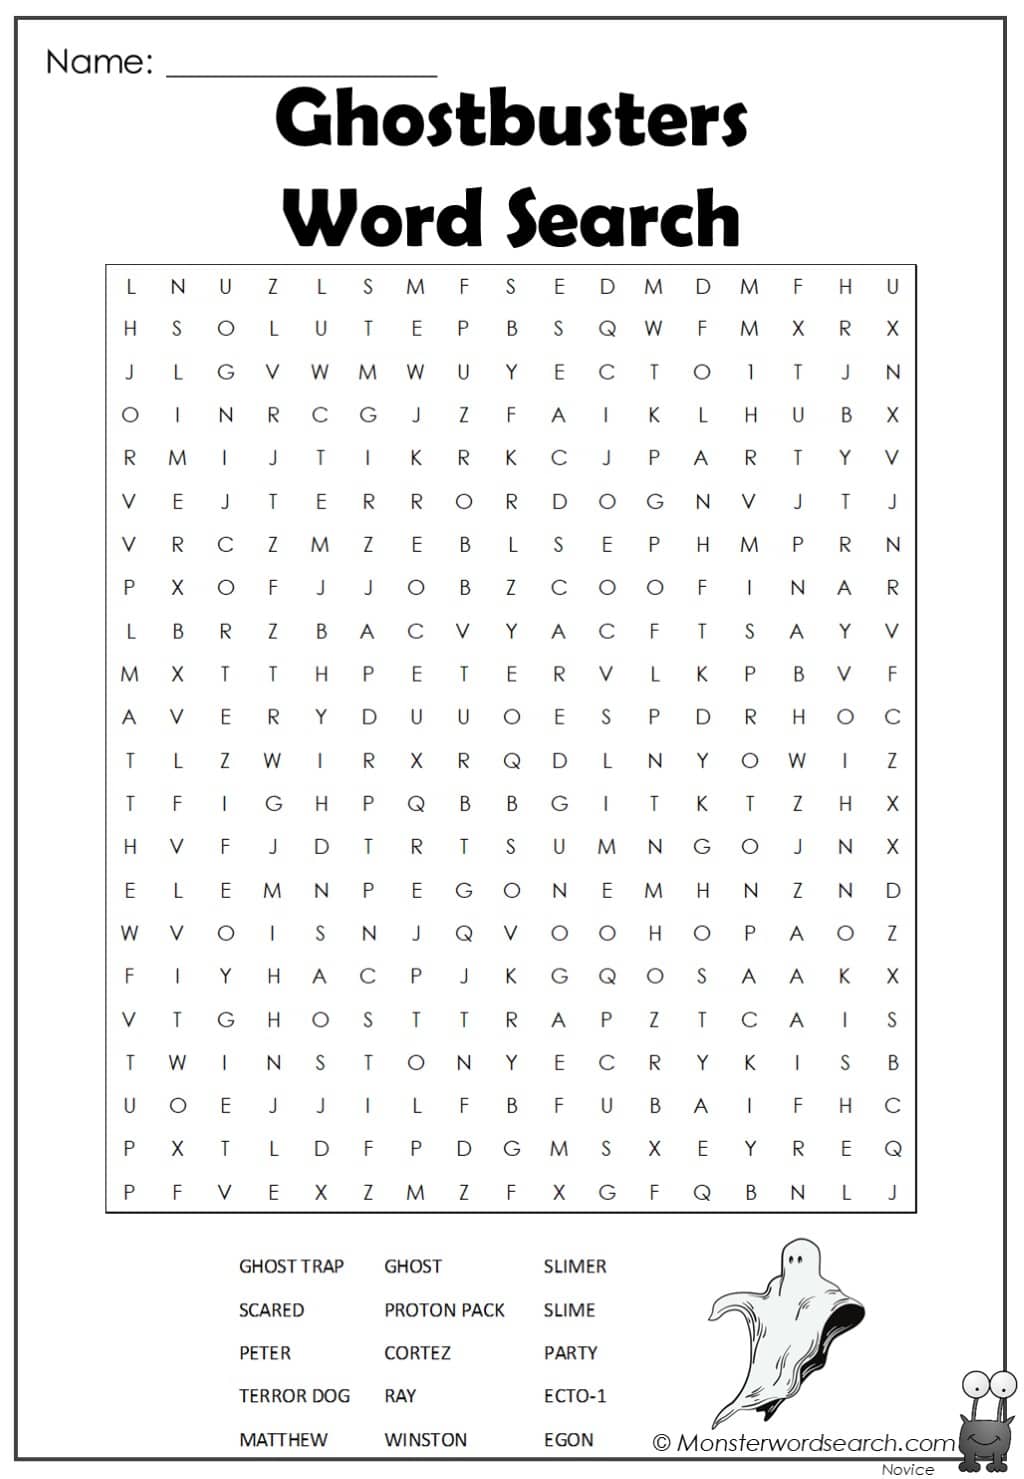 Ghostbusters Word Search